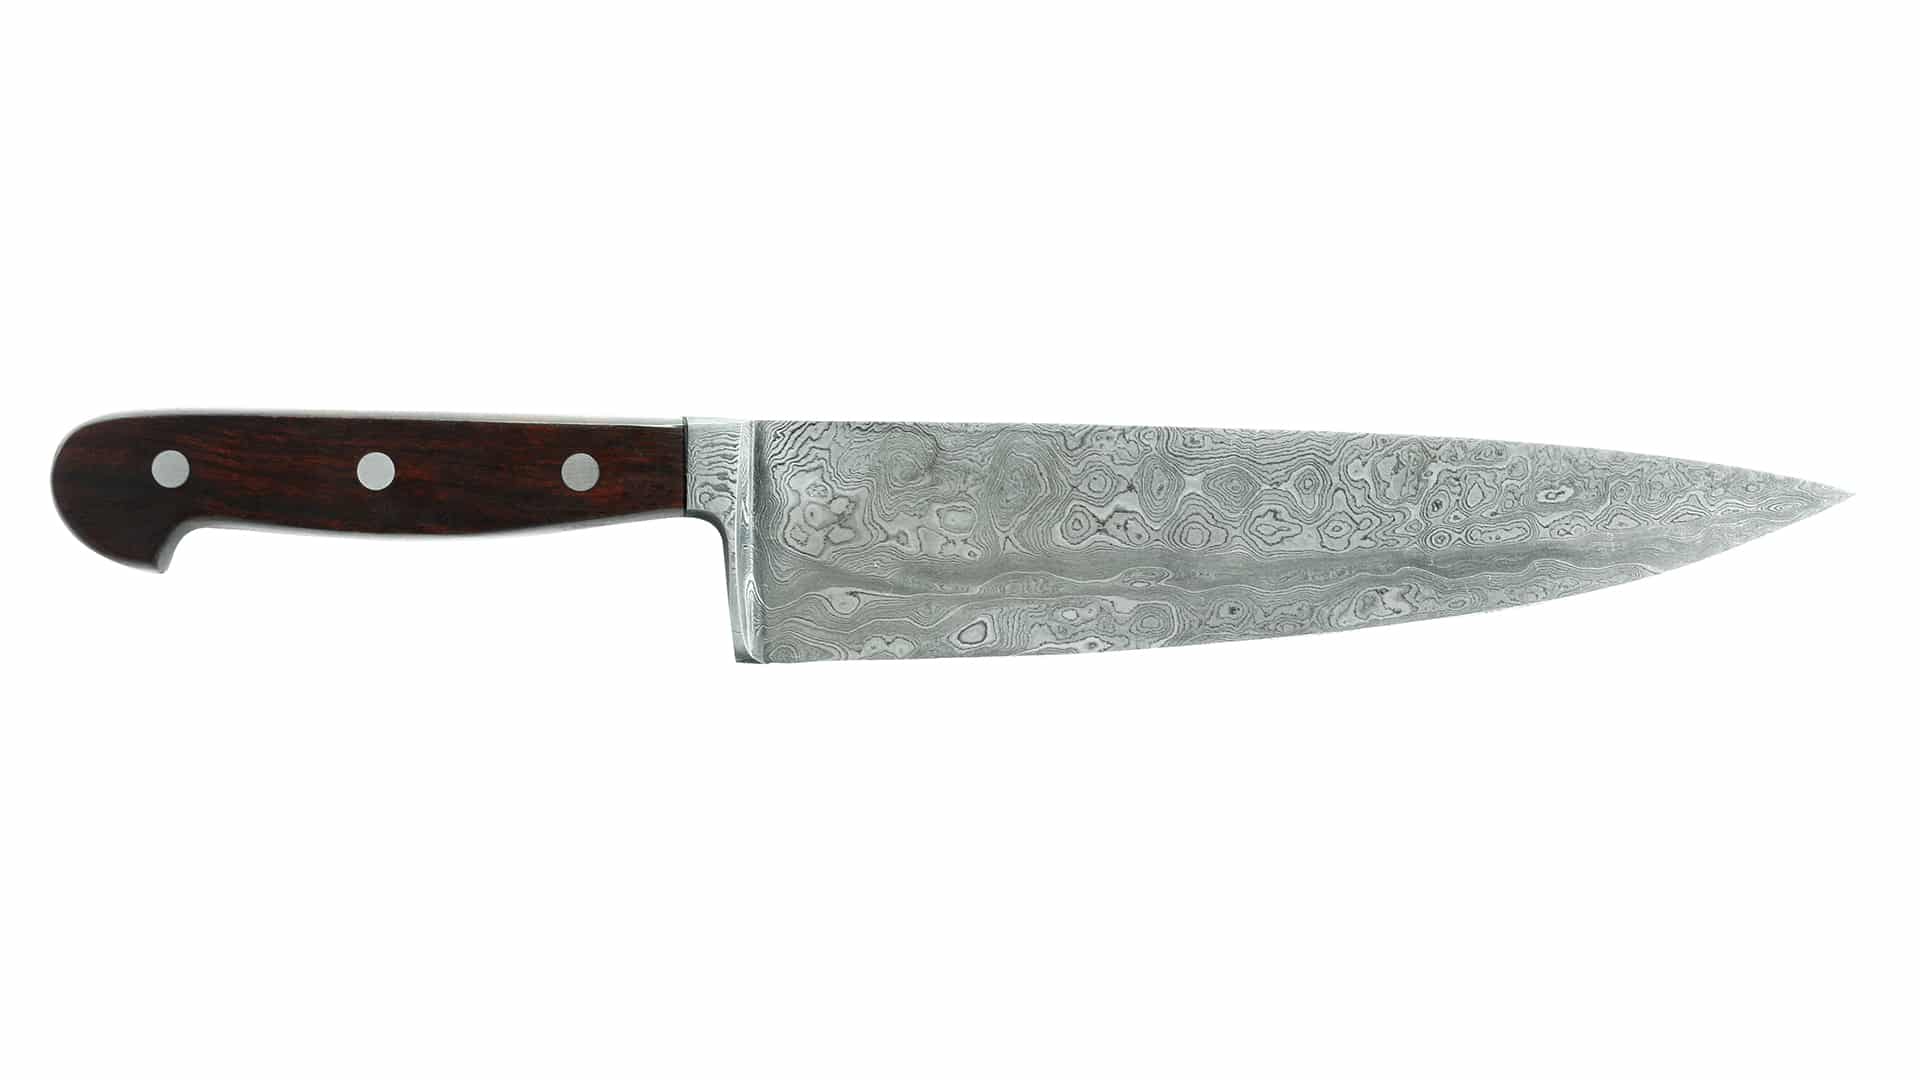 Güde chef's knife Damascus steel rear view